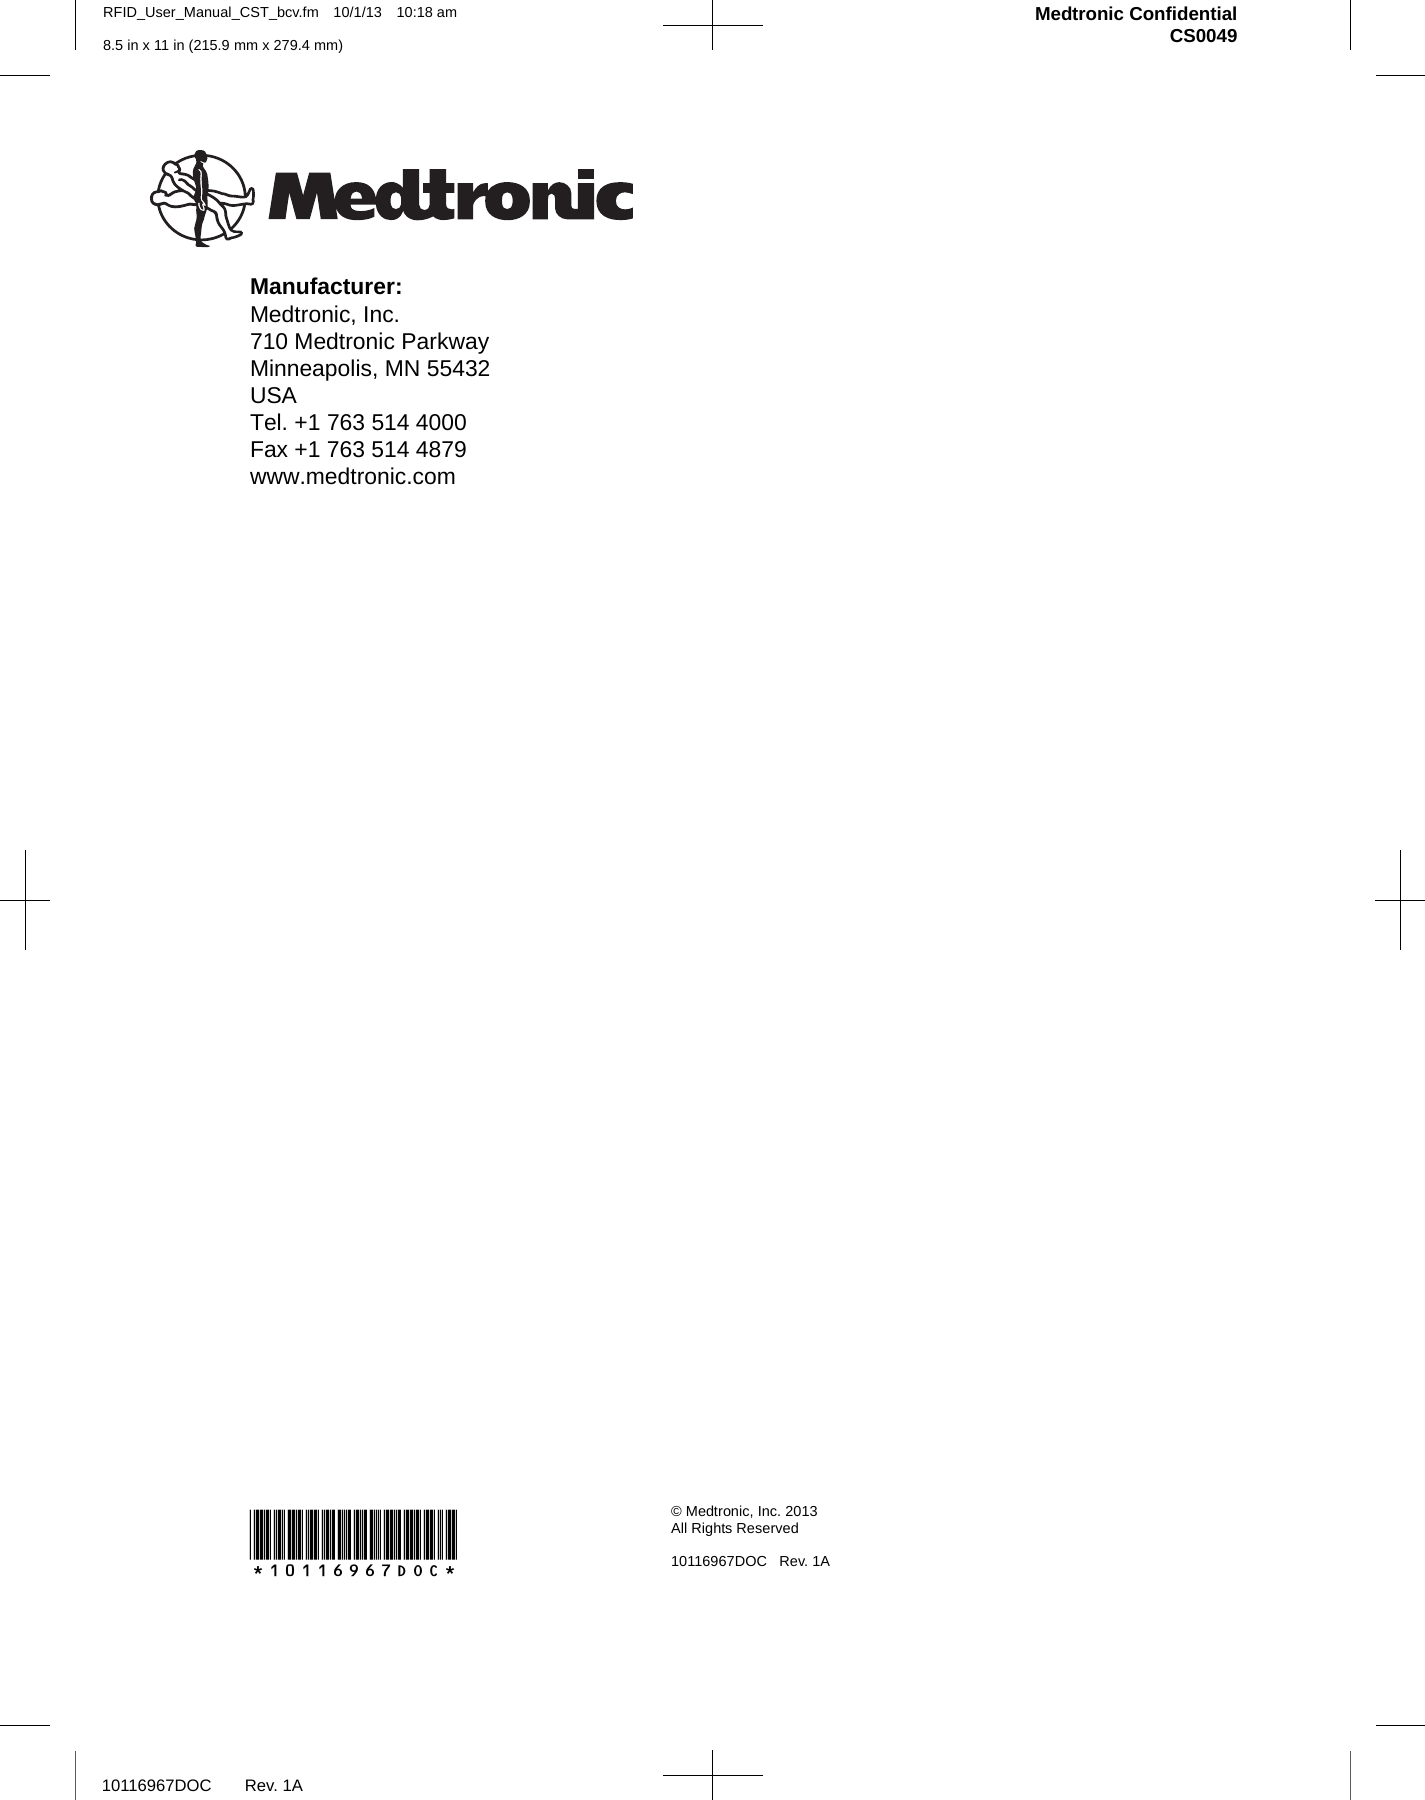 Medtronic ConfidentialCS0049RFID_User_Manual_CST_bcv.fm 10/1/13 10:18 am   8.5 in x 11 in (215.9 mm x 279.4 mm)10116967DOC Rev. 1A*10116967DOC* © Medtronic, Inc. 2013All Rights Reserved10116967DOC Rev. 1AManufacturer:Medtronic, Inc.710 Medtronic ParkwayMinneapolis, MN 55432USATel. +1 763 514 4000Fax +1 763 514 4879www.medtronic.com